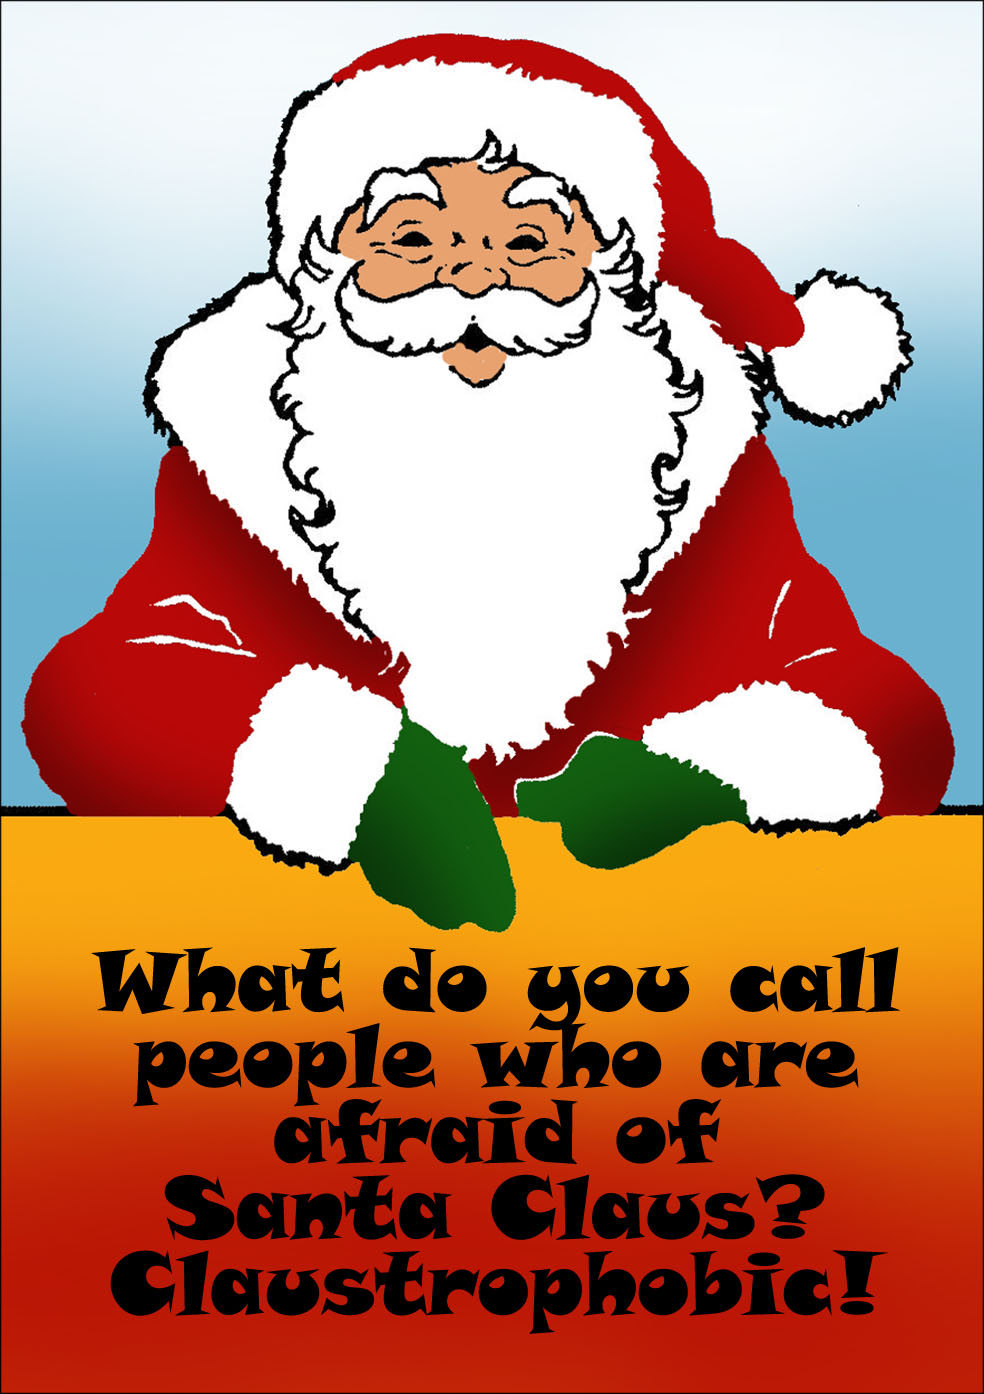 Funny Christmas riddle: What do you call people who are afraid of Santa Claus? Claustrophobic!